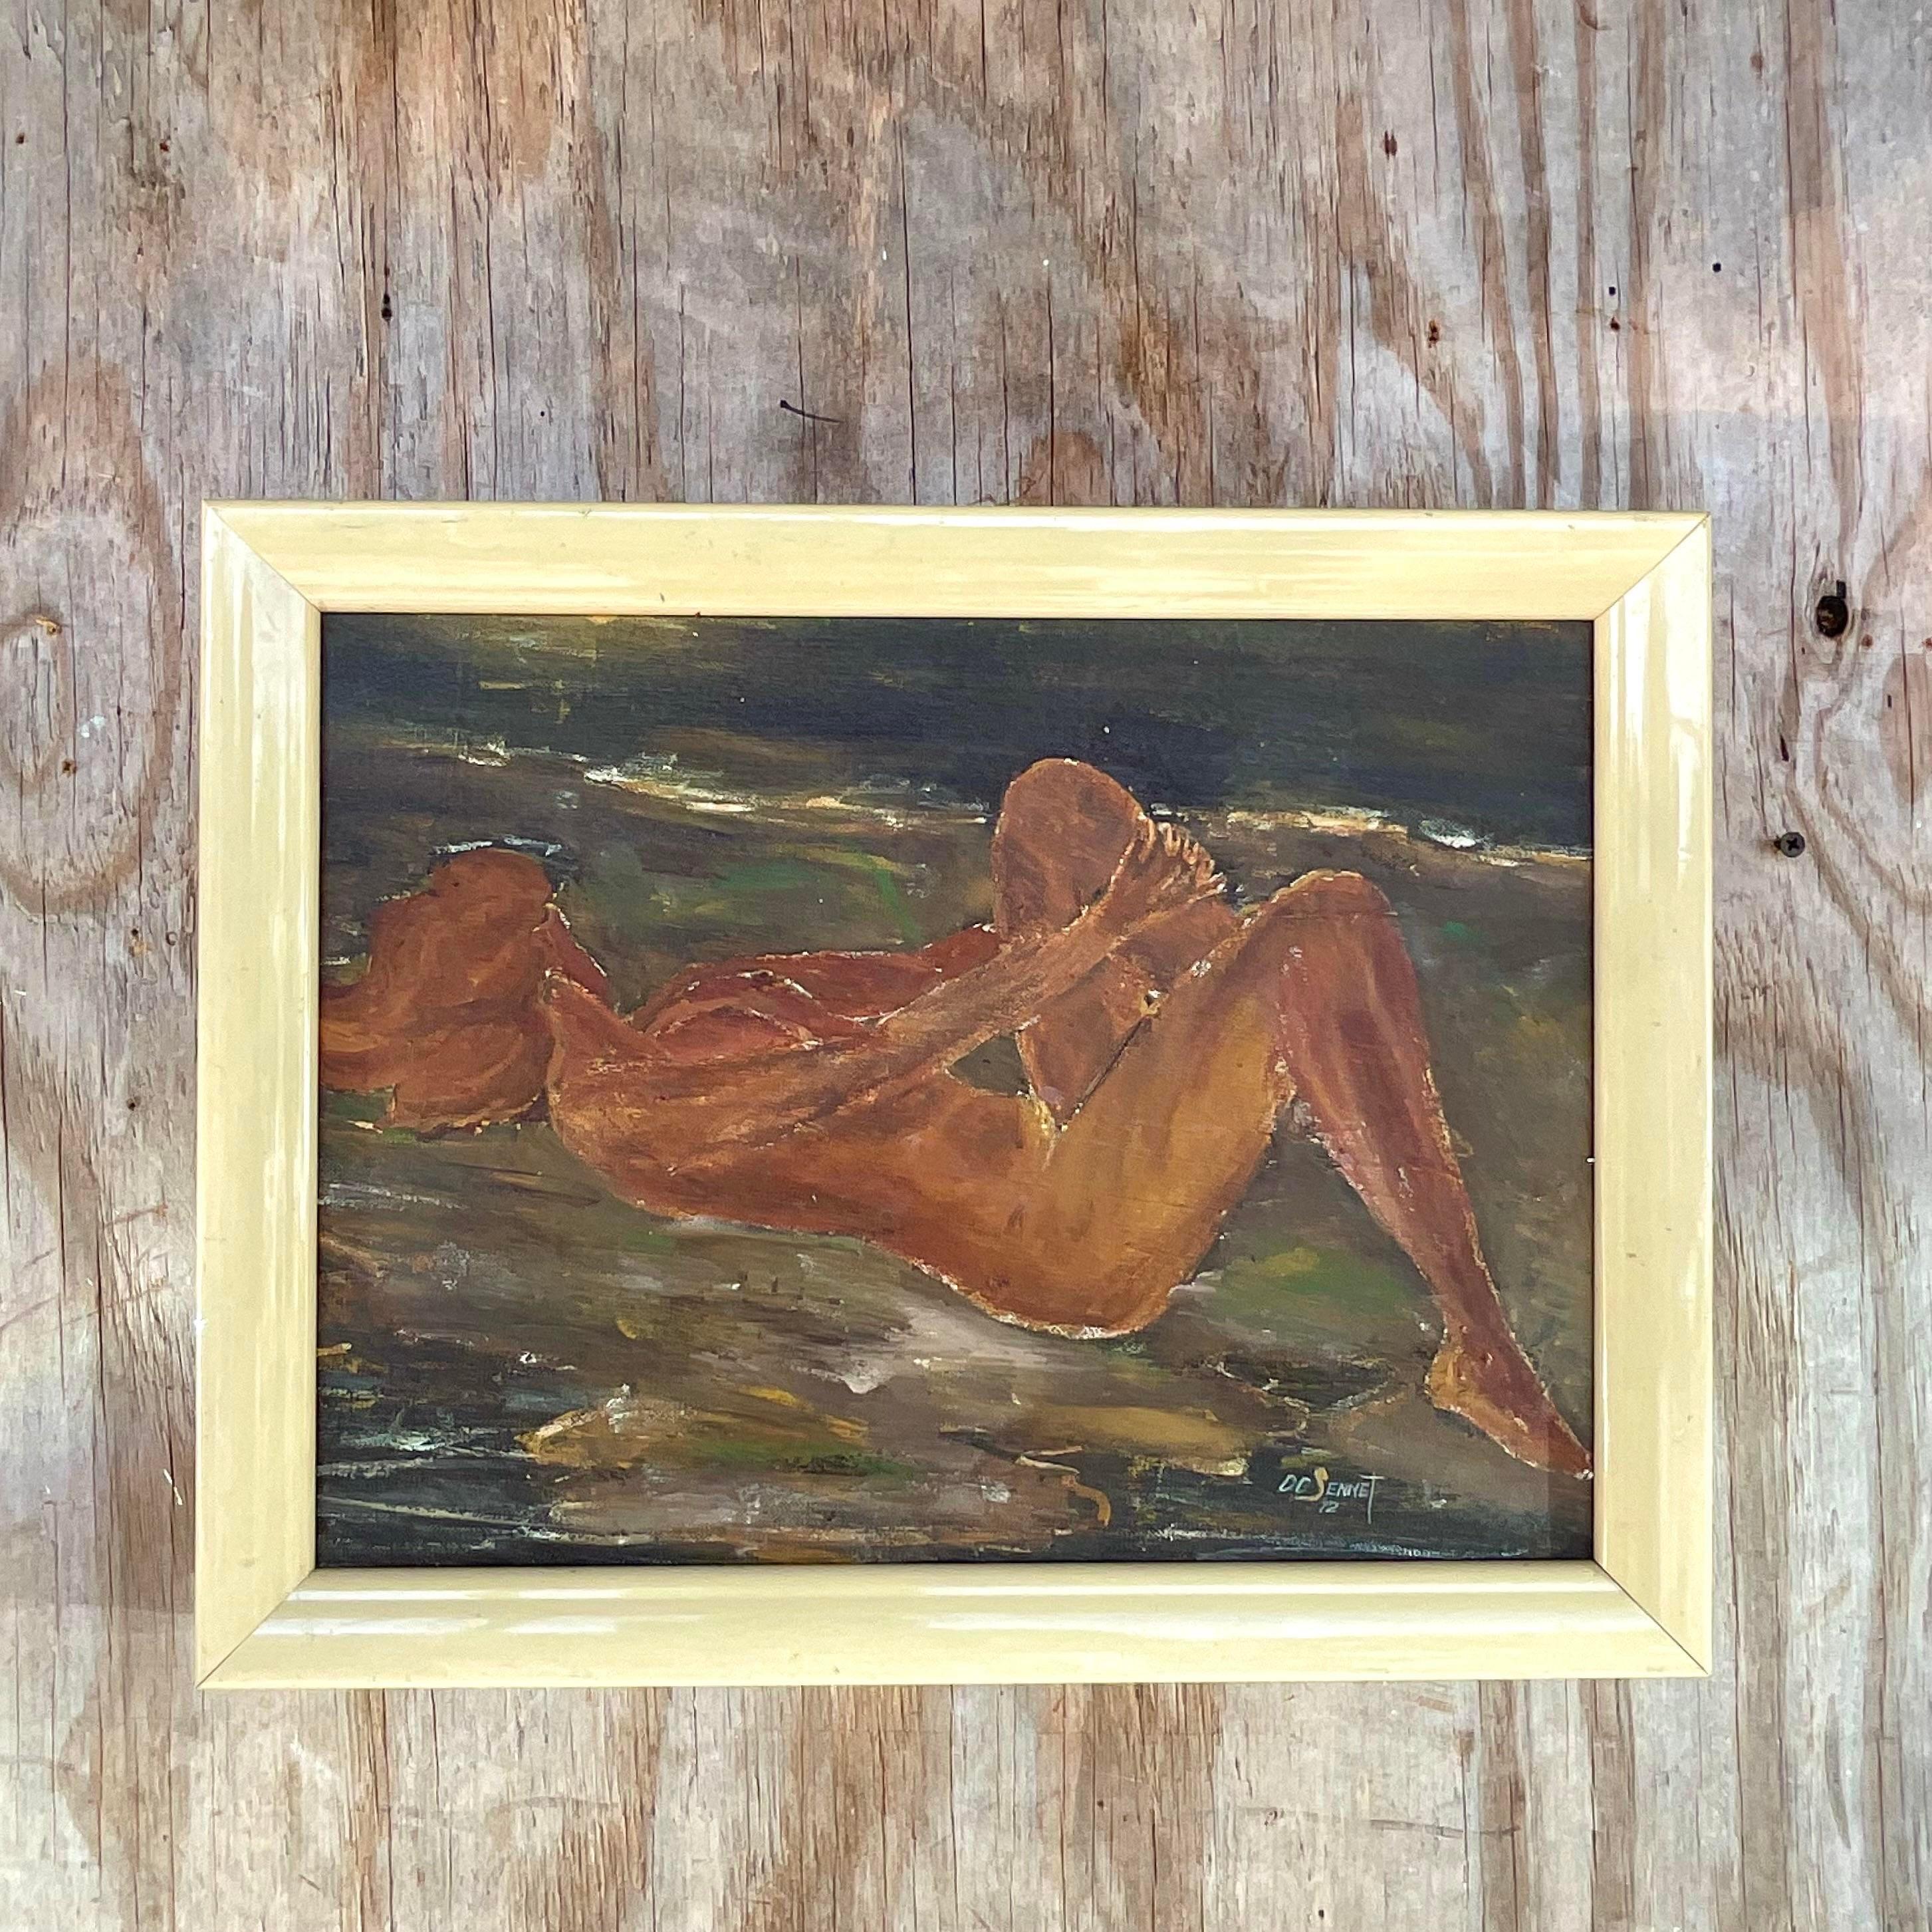 A fabulous vintage Boho original oil painting on canvas. A chic abstract Expressionist Figural of a female nude. Acquired from a Palm Beach estate.